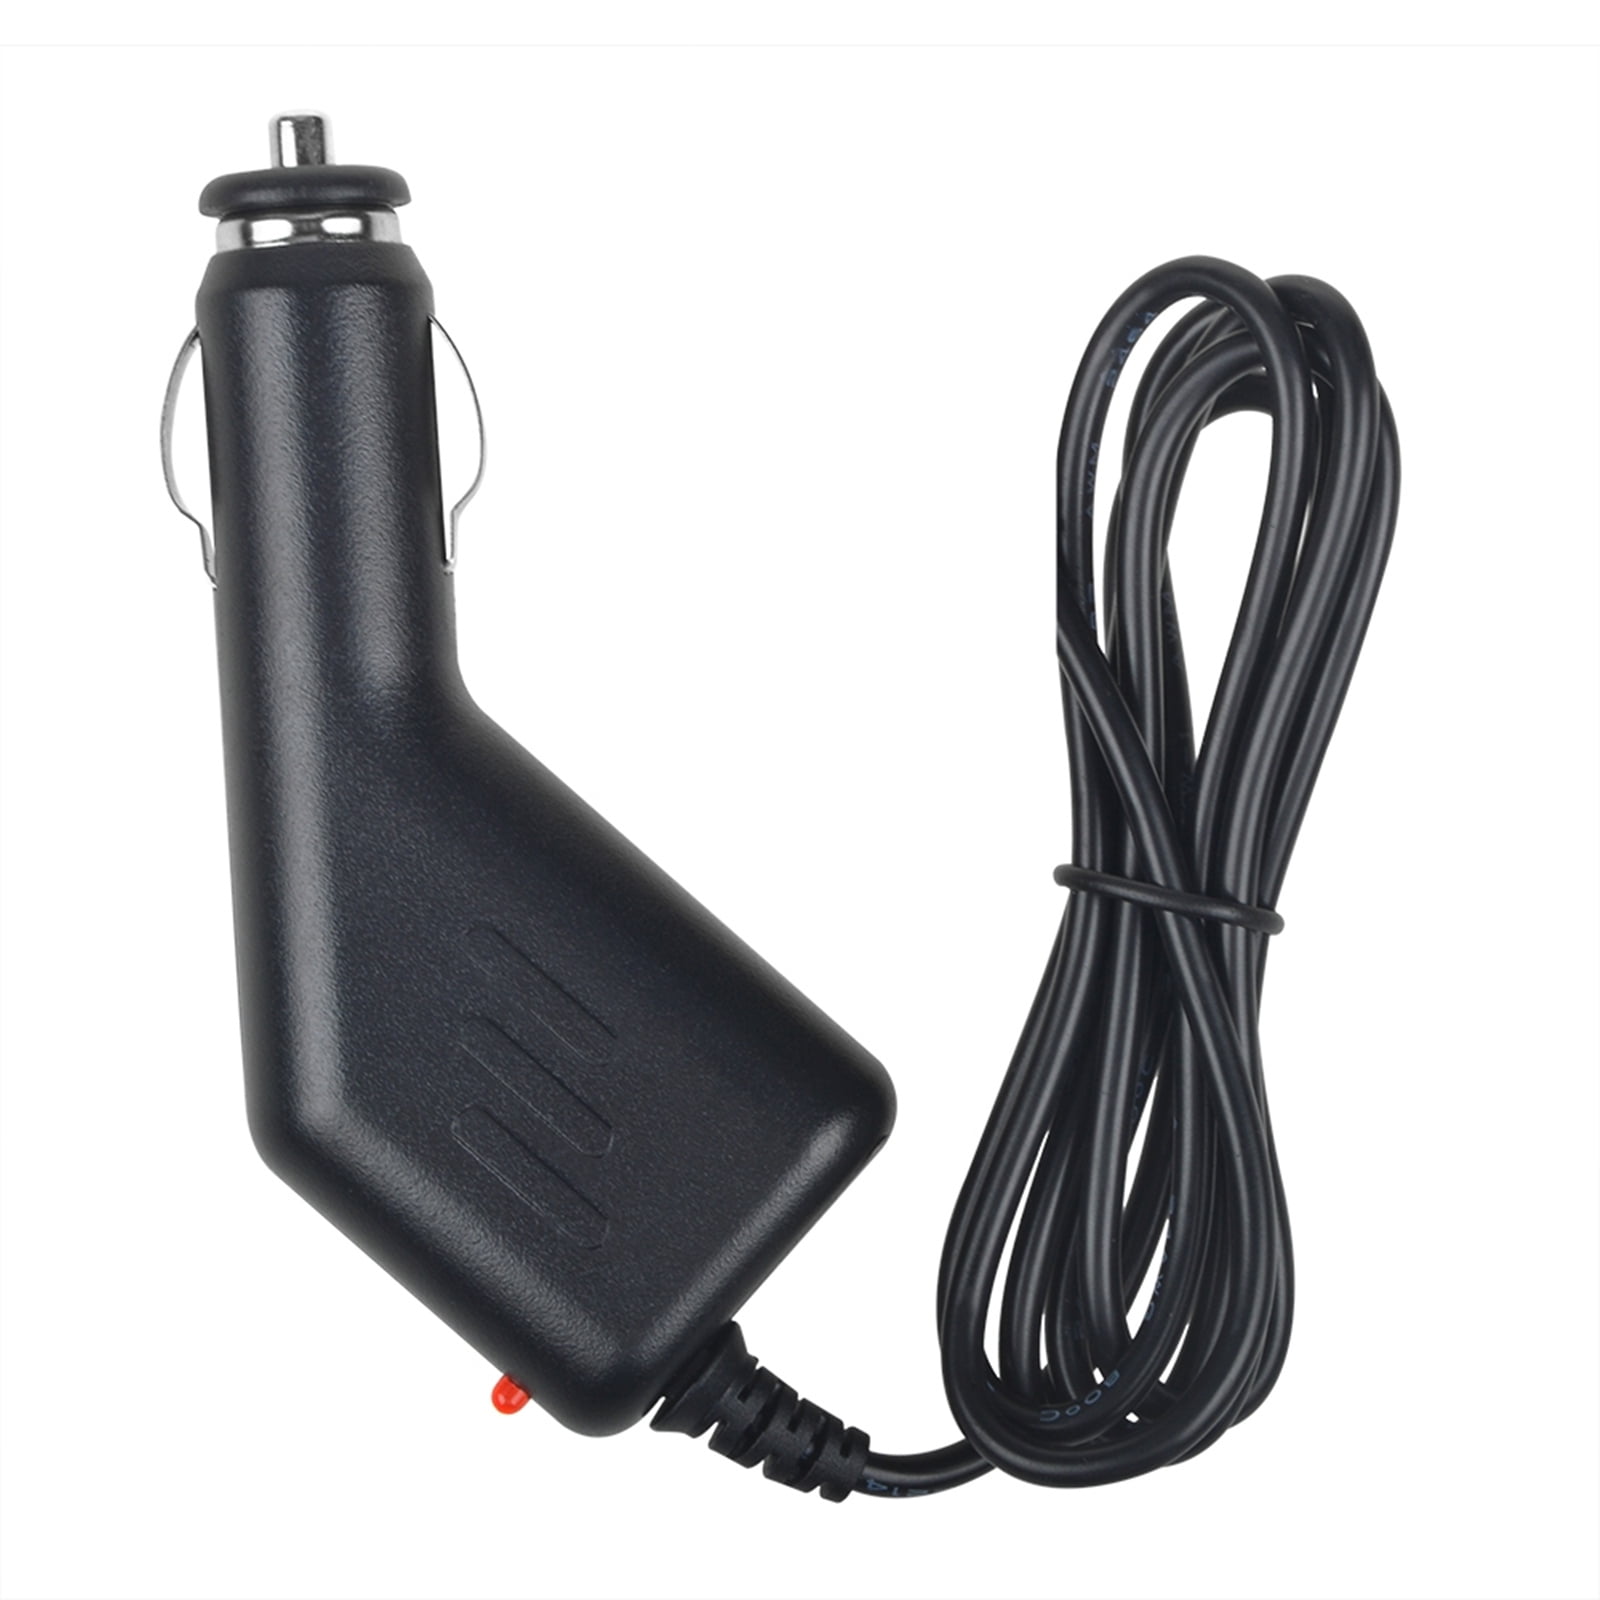 AC DC Adapter Charger For Klipsch R-4B Wireless Subwoofer 24V Power Supply Cord 